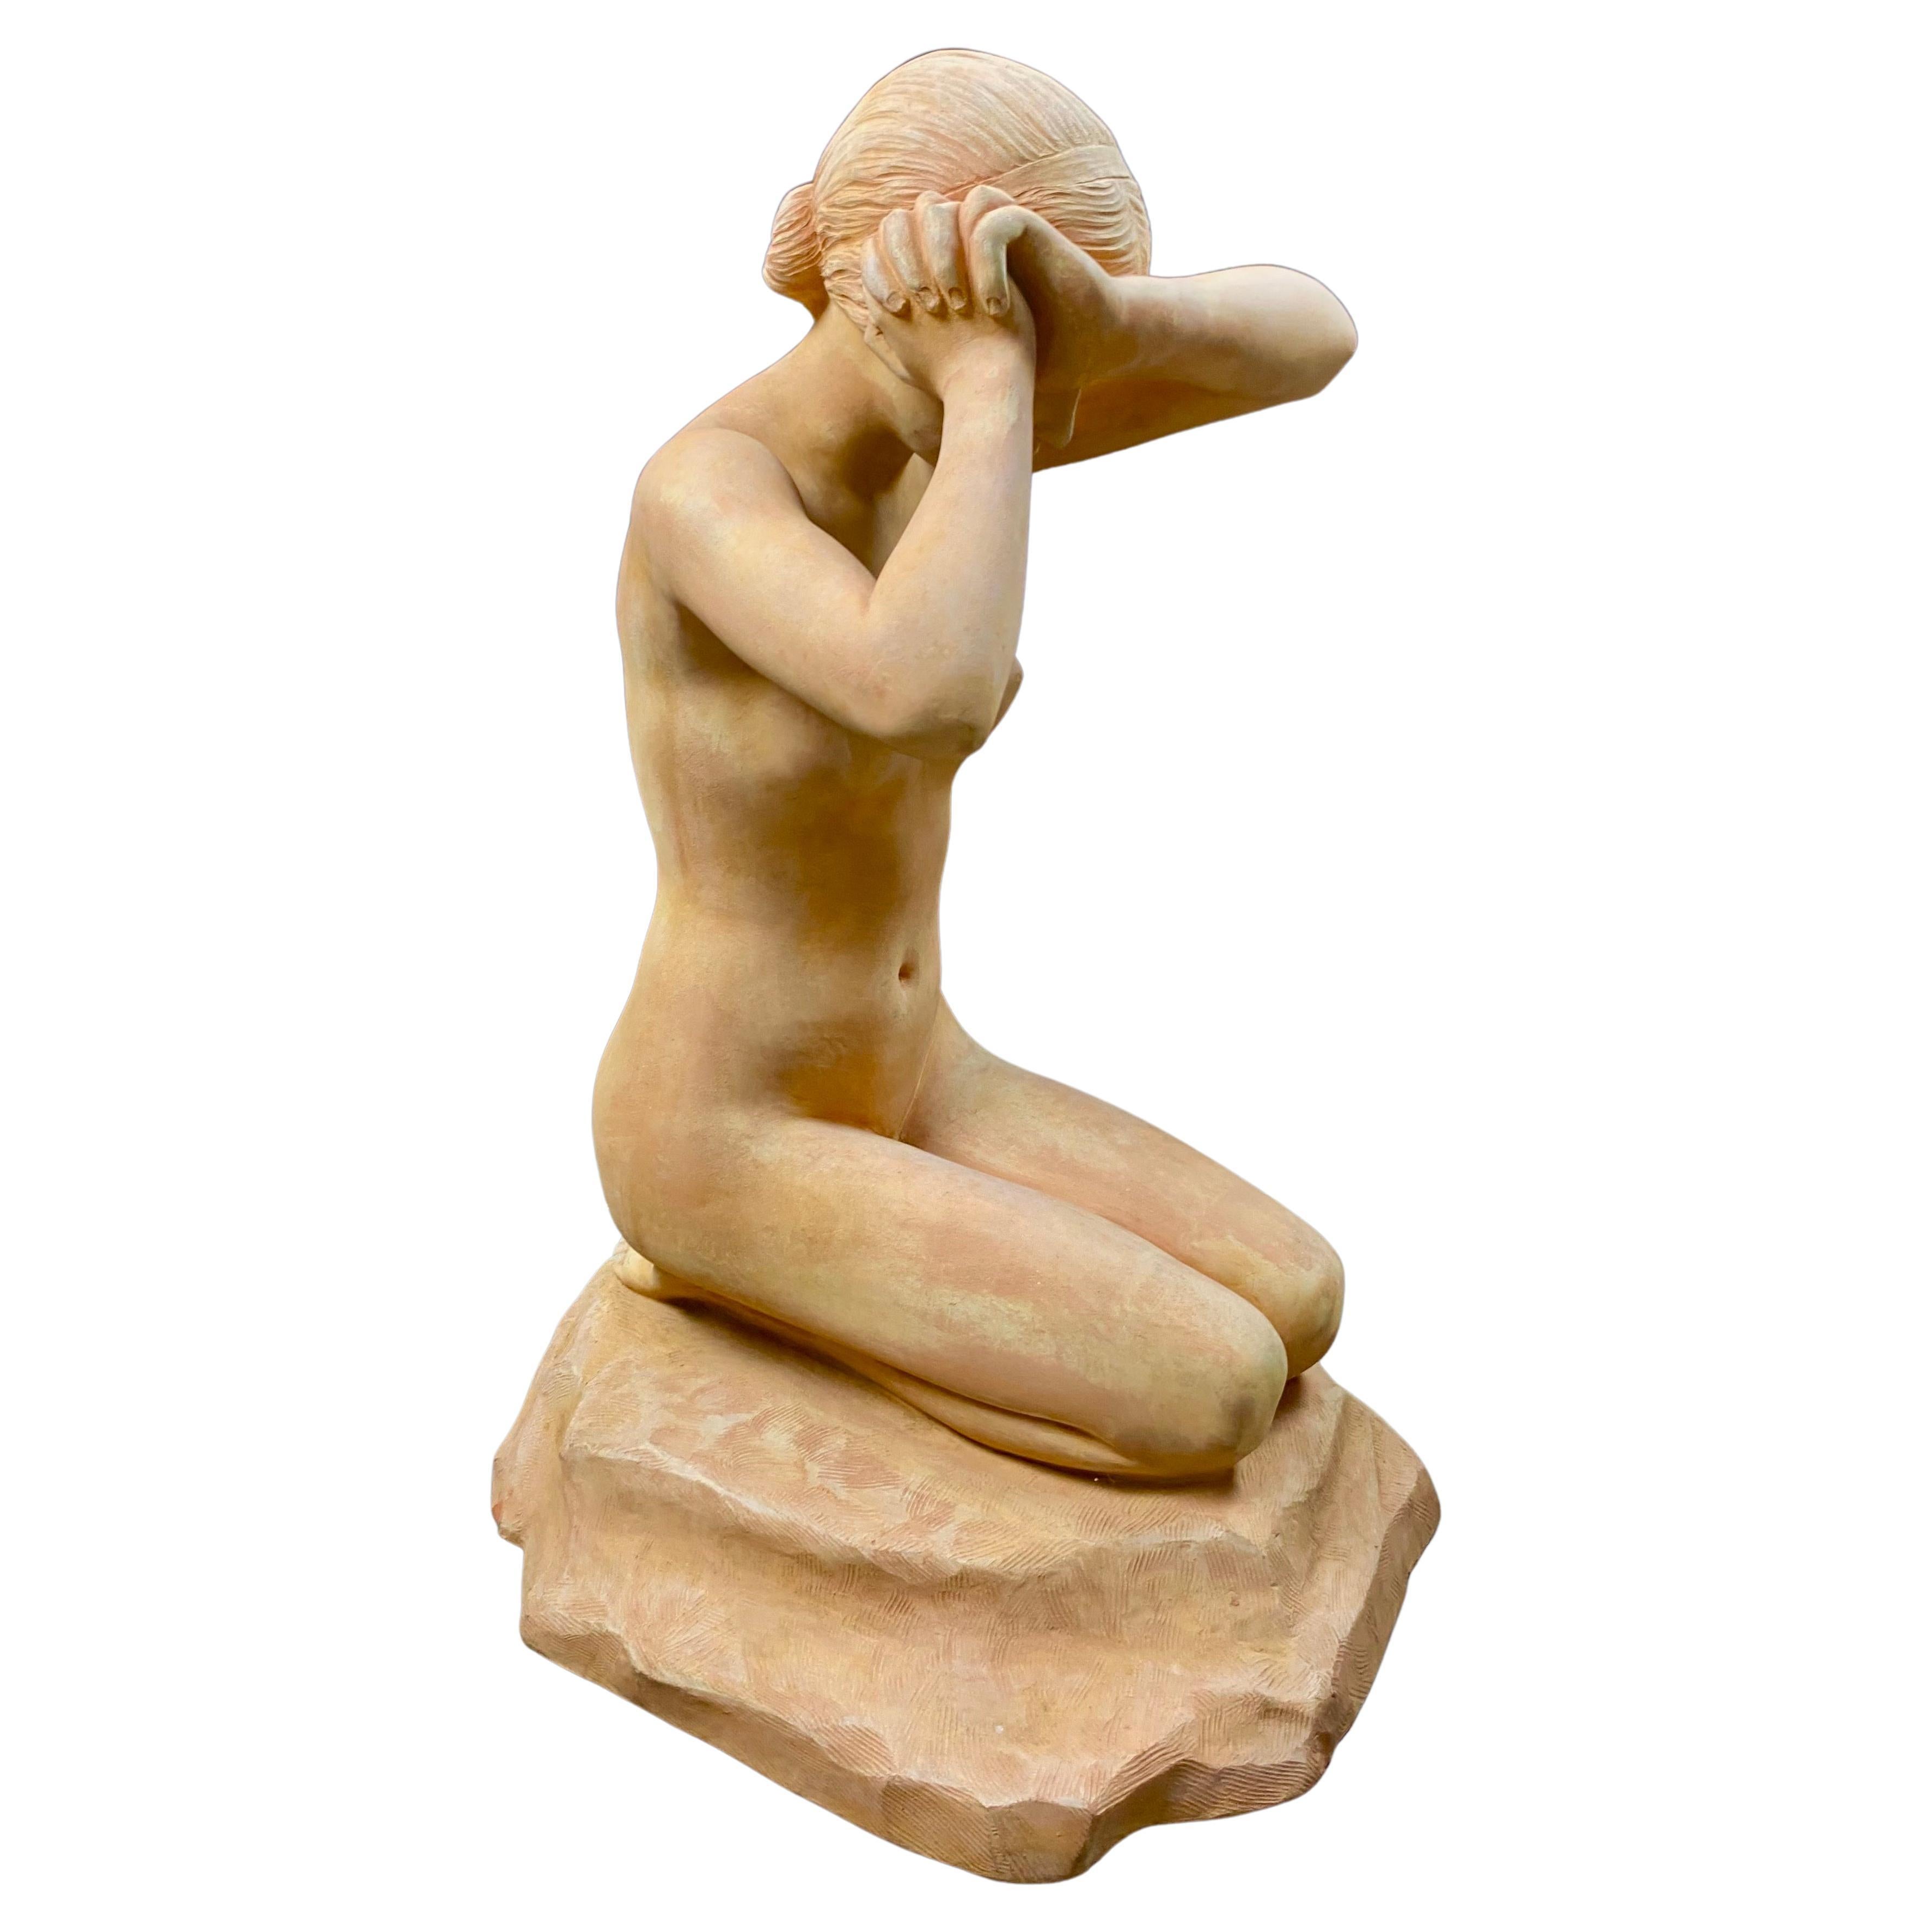 Female nude in terracotta.
Signed 